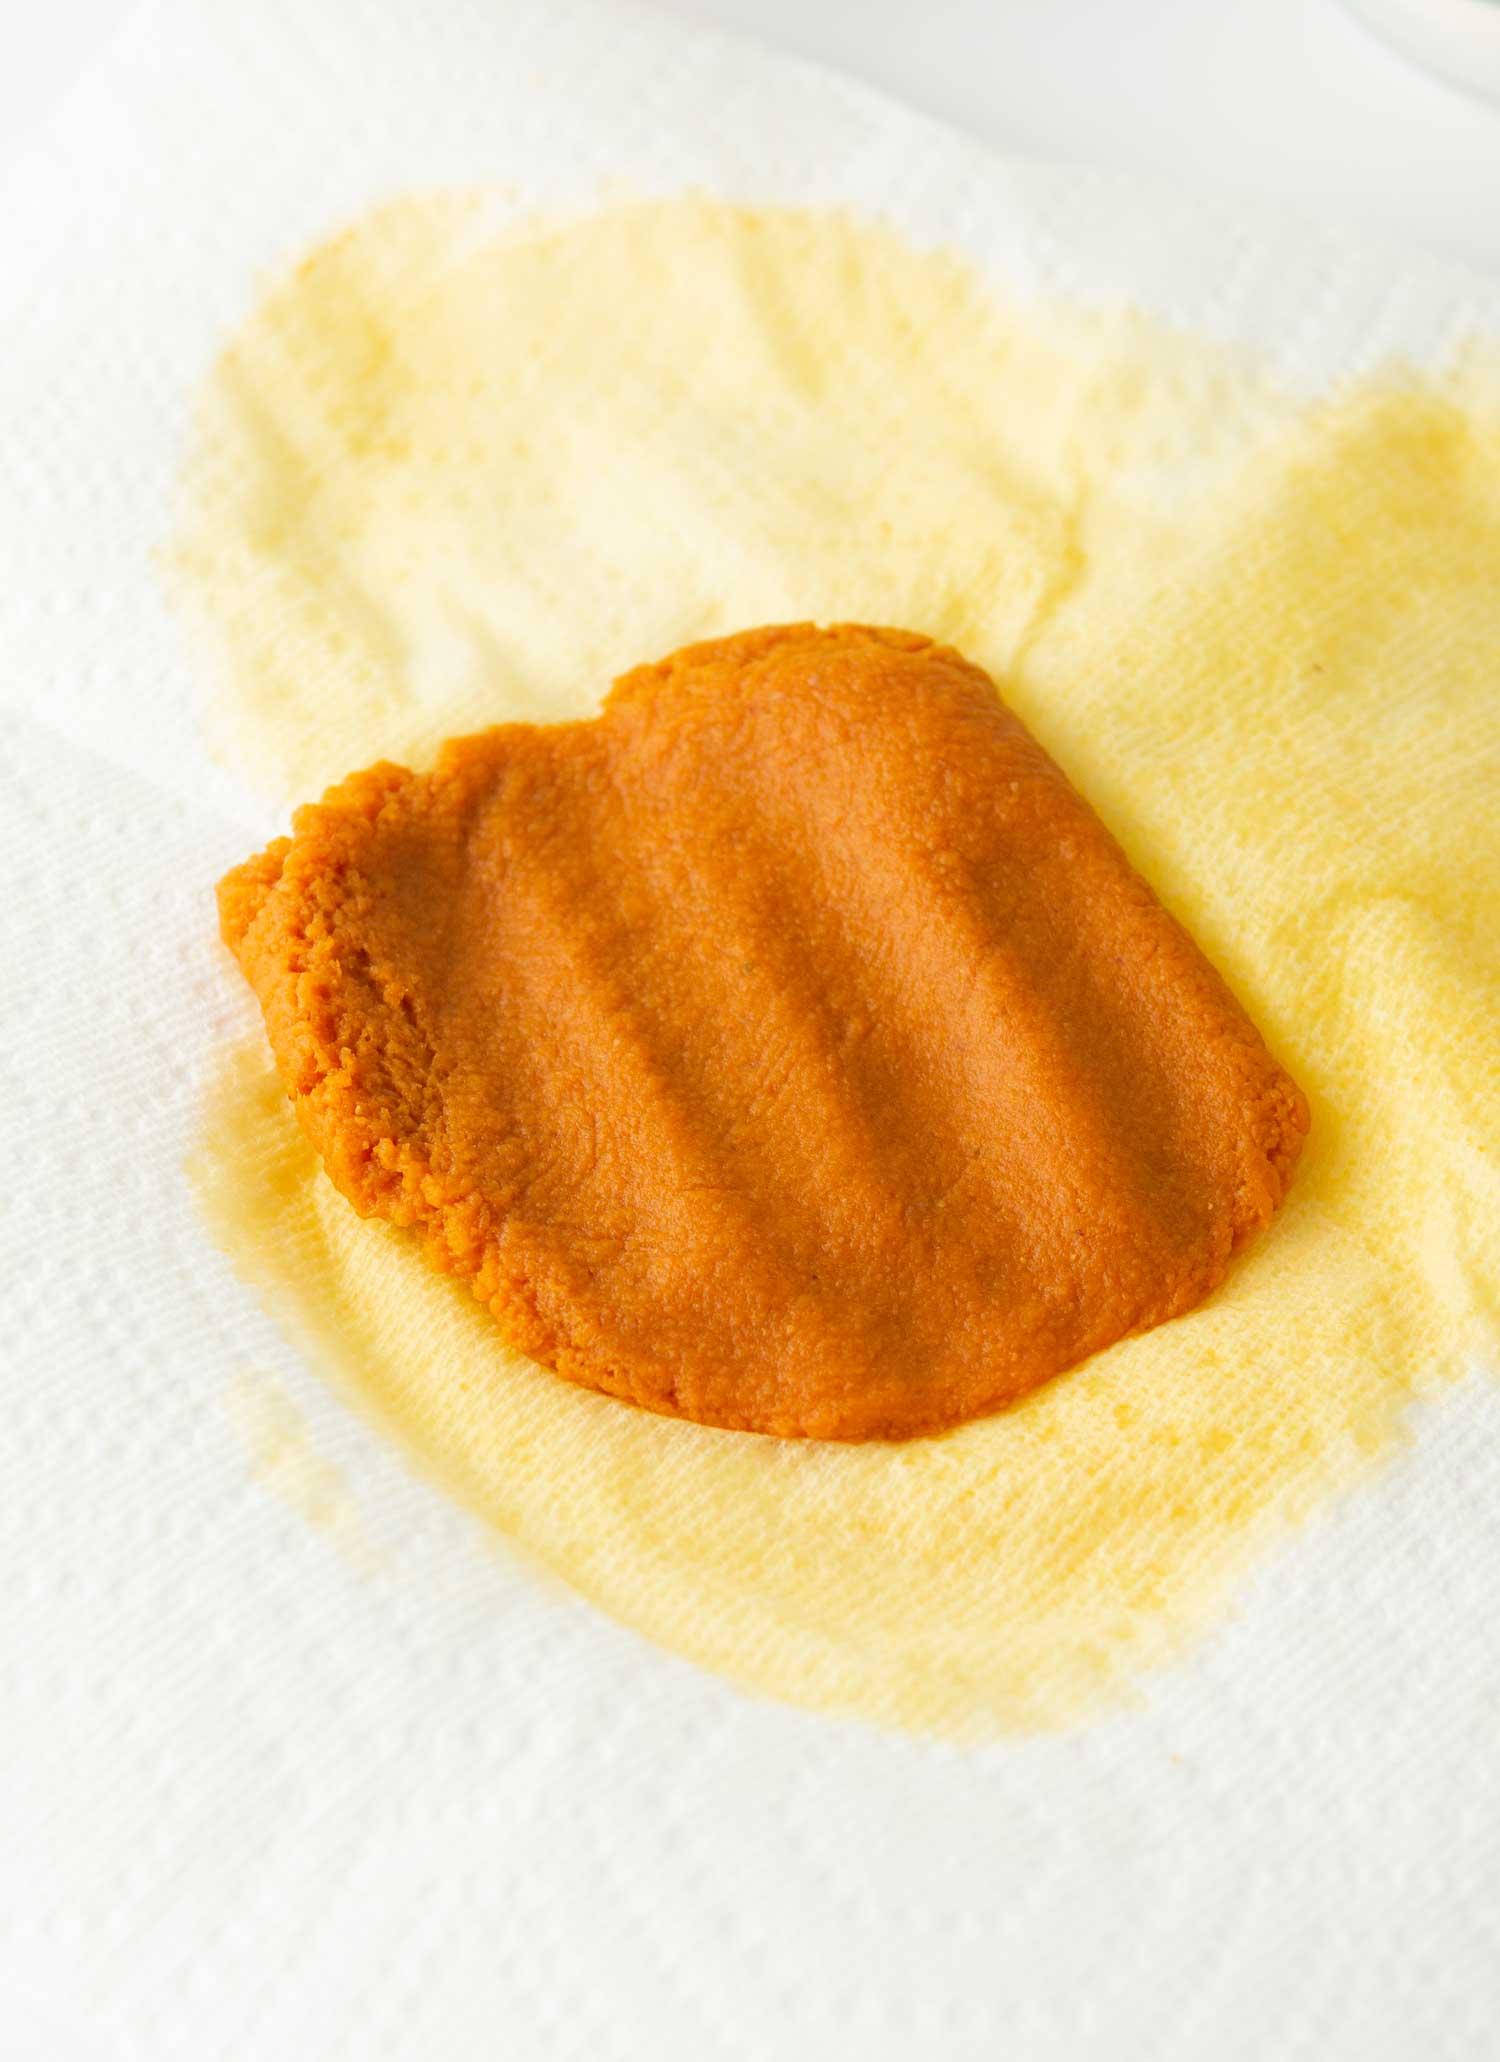 blotting water out of pumpkin puree with paper towel